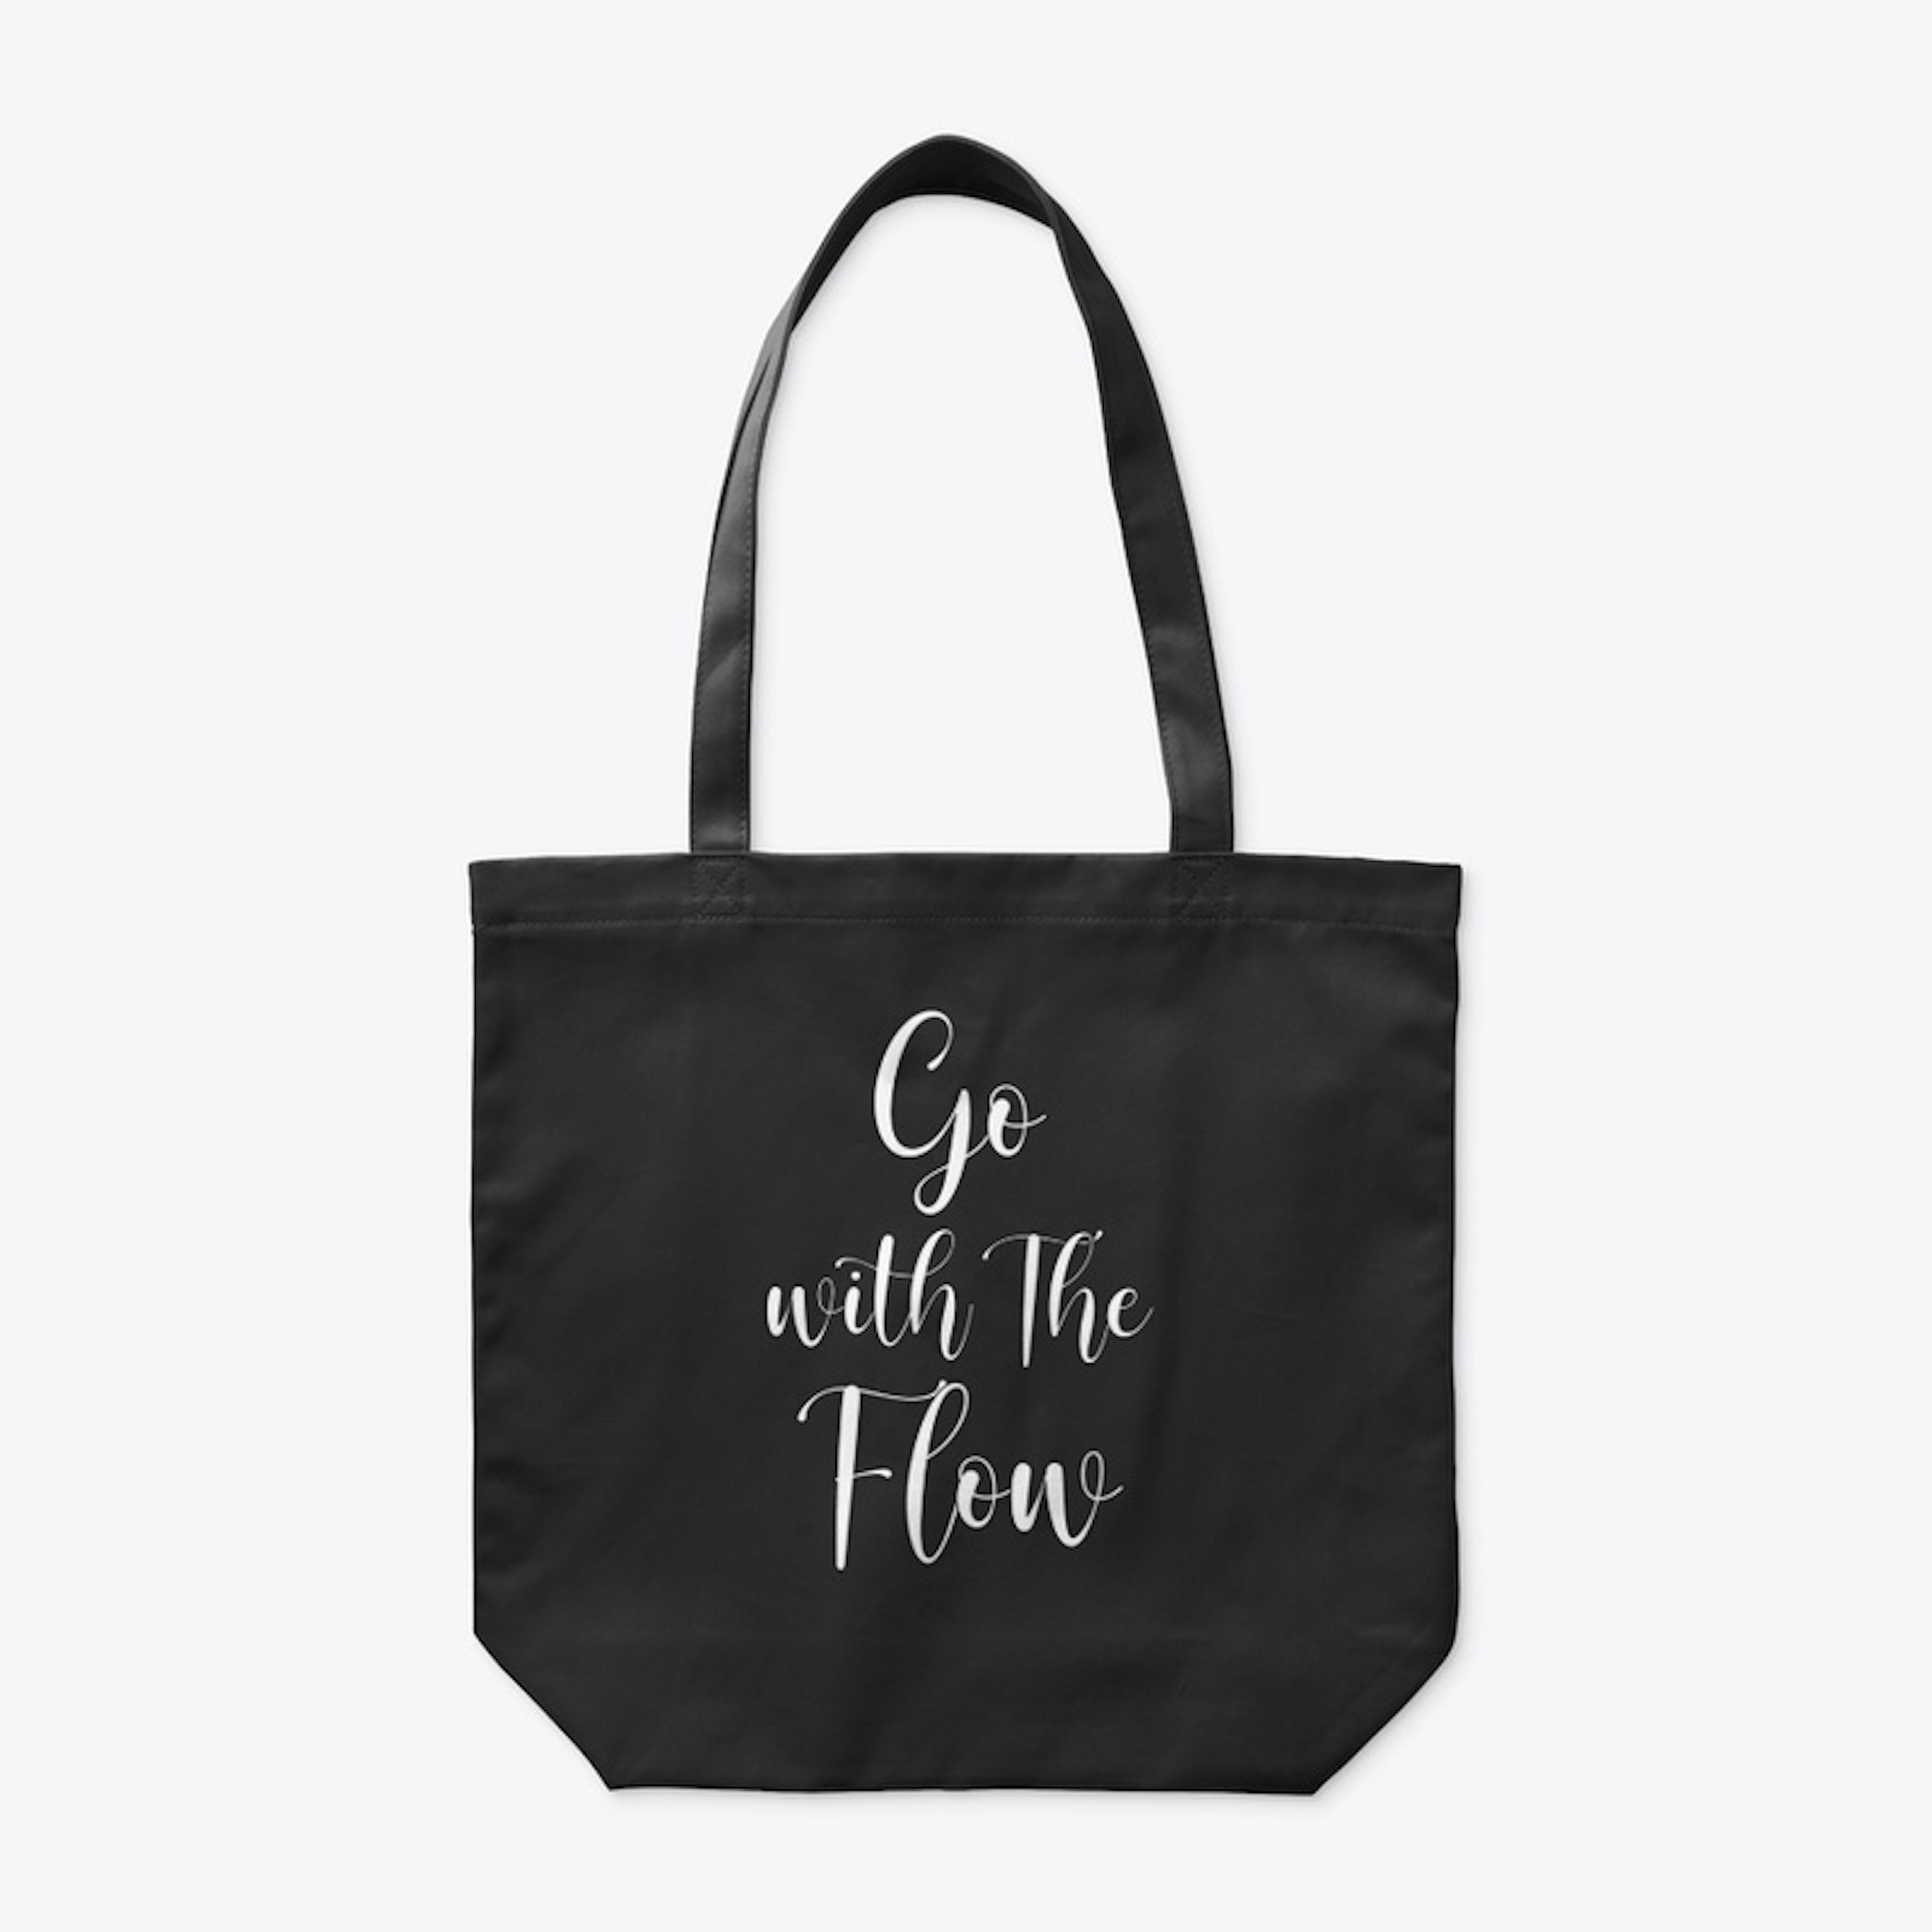 "Go with the Flow" Collection